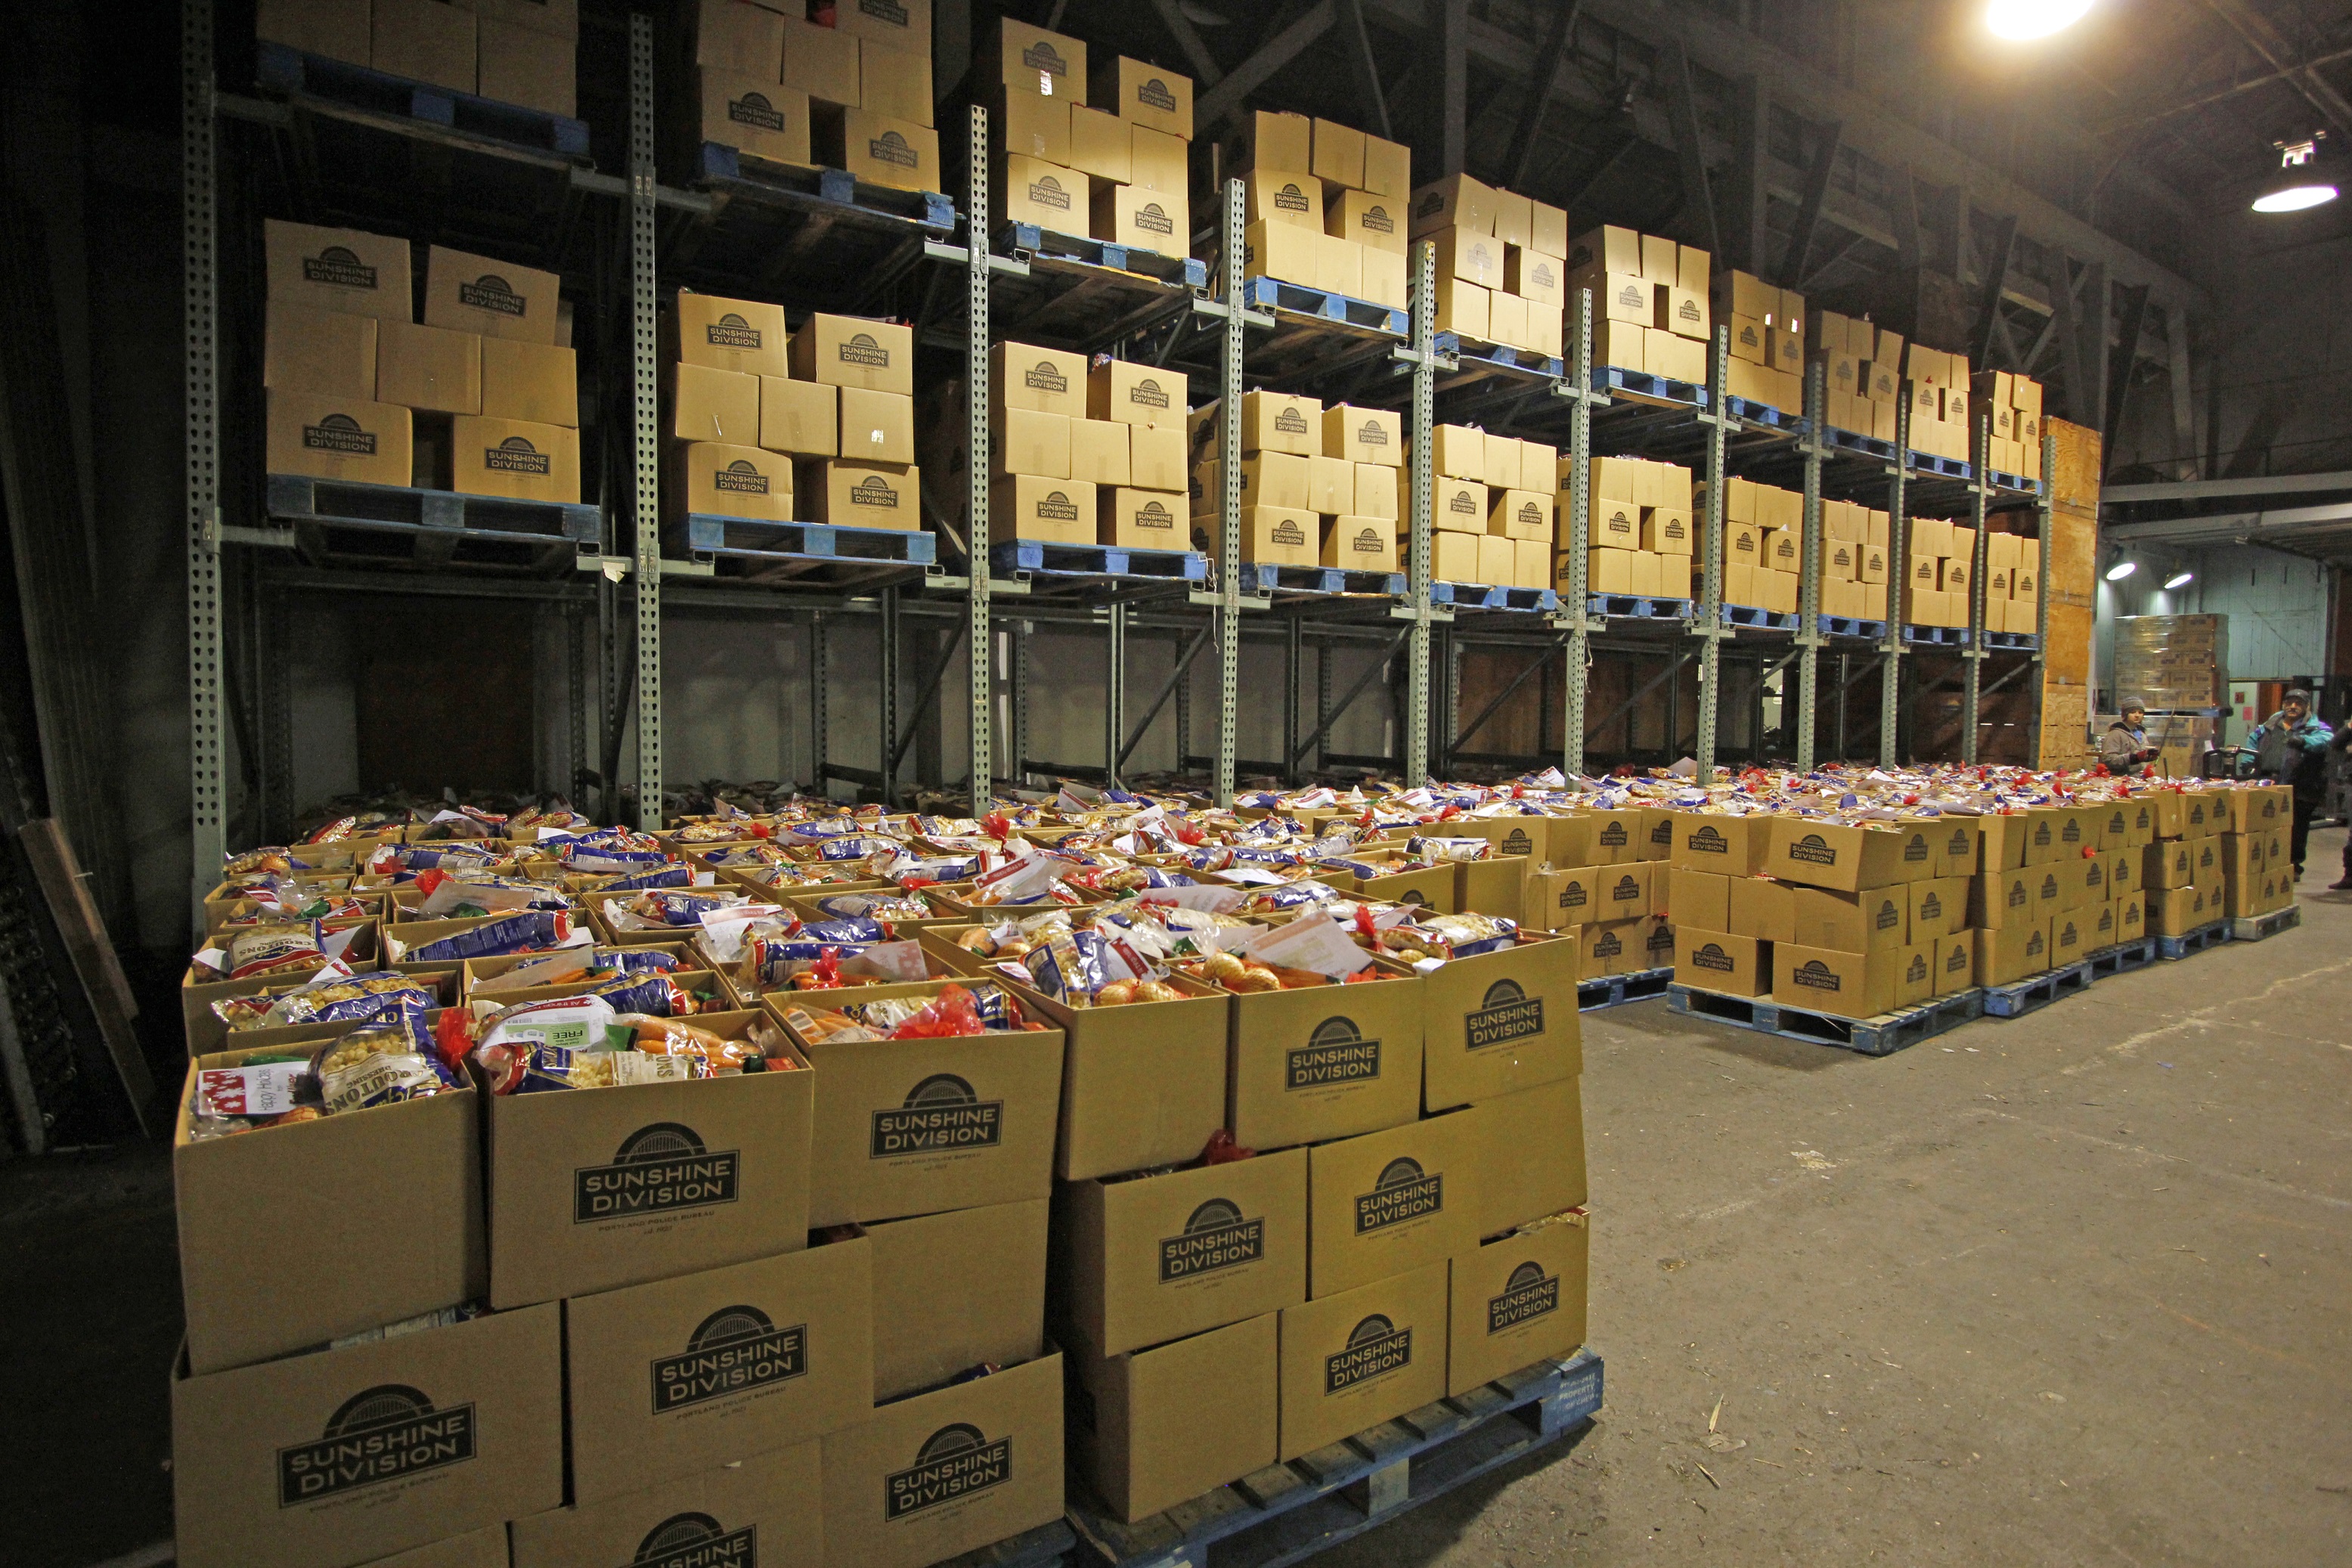 A warehouse full of boxes that say "Sunshine Division" loaded with food